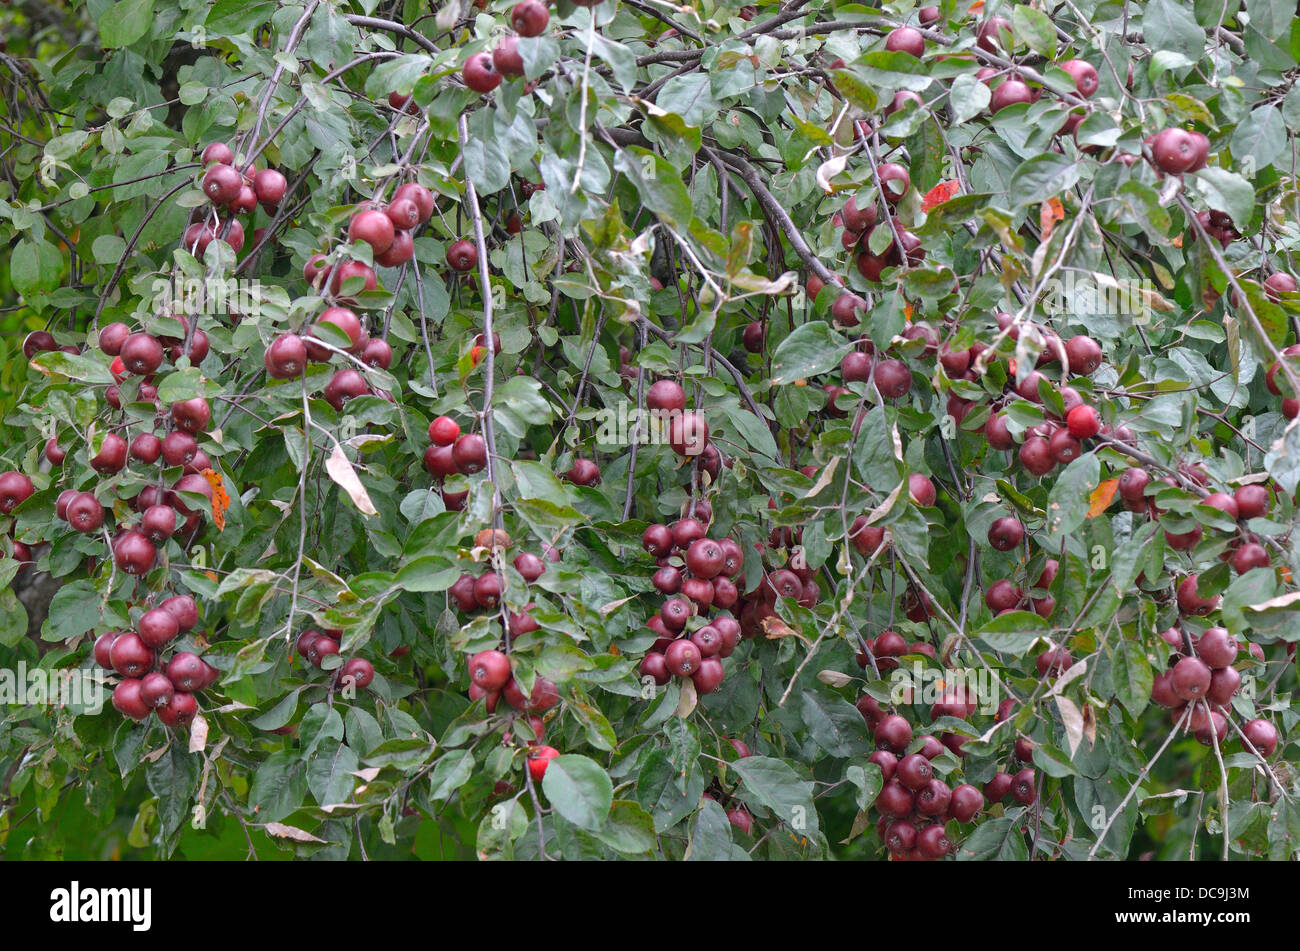 Crab apple tree with young fruits Malus purpurea Stock Photo